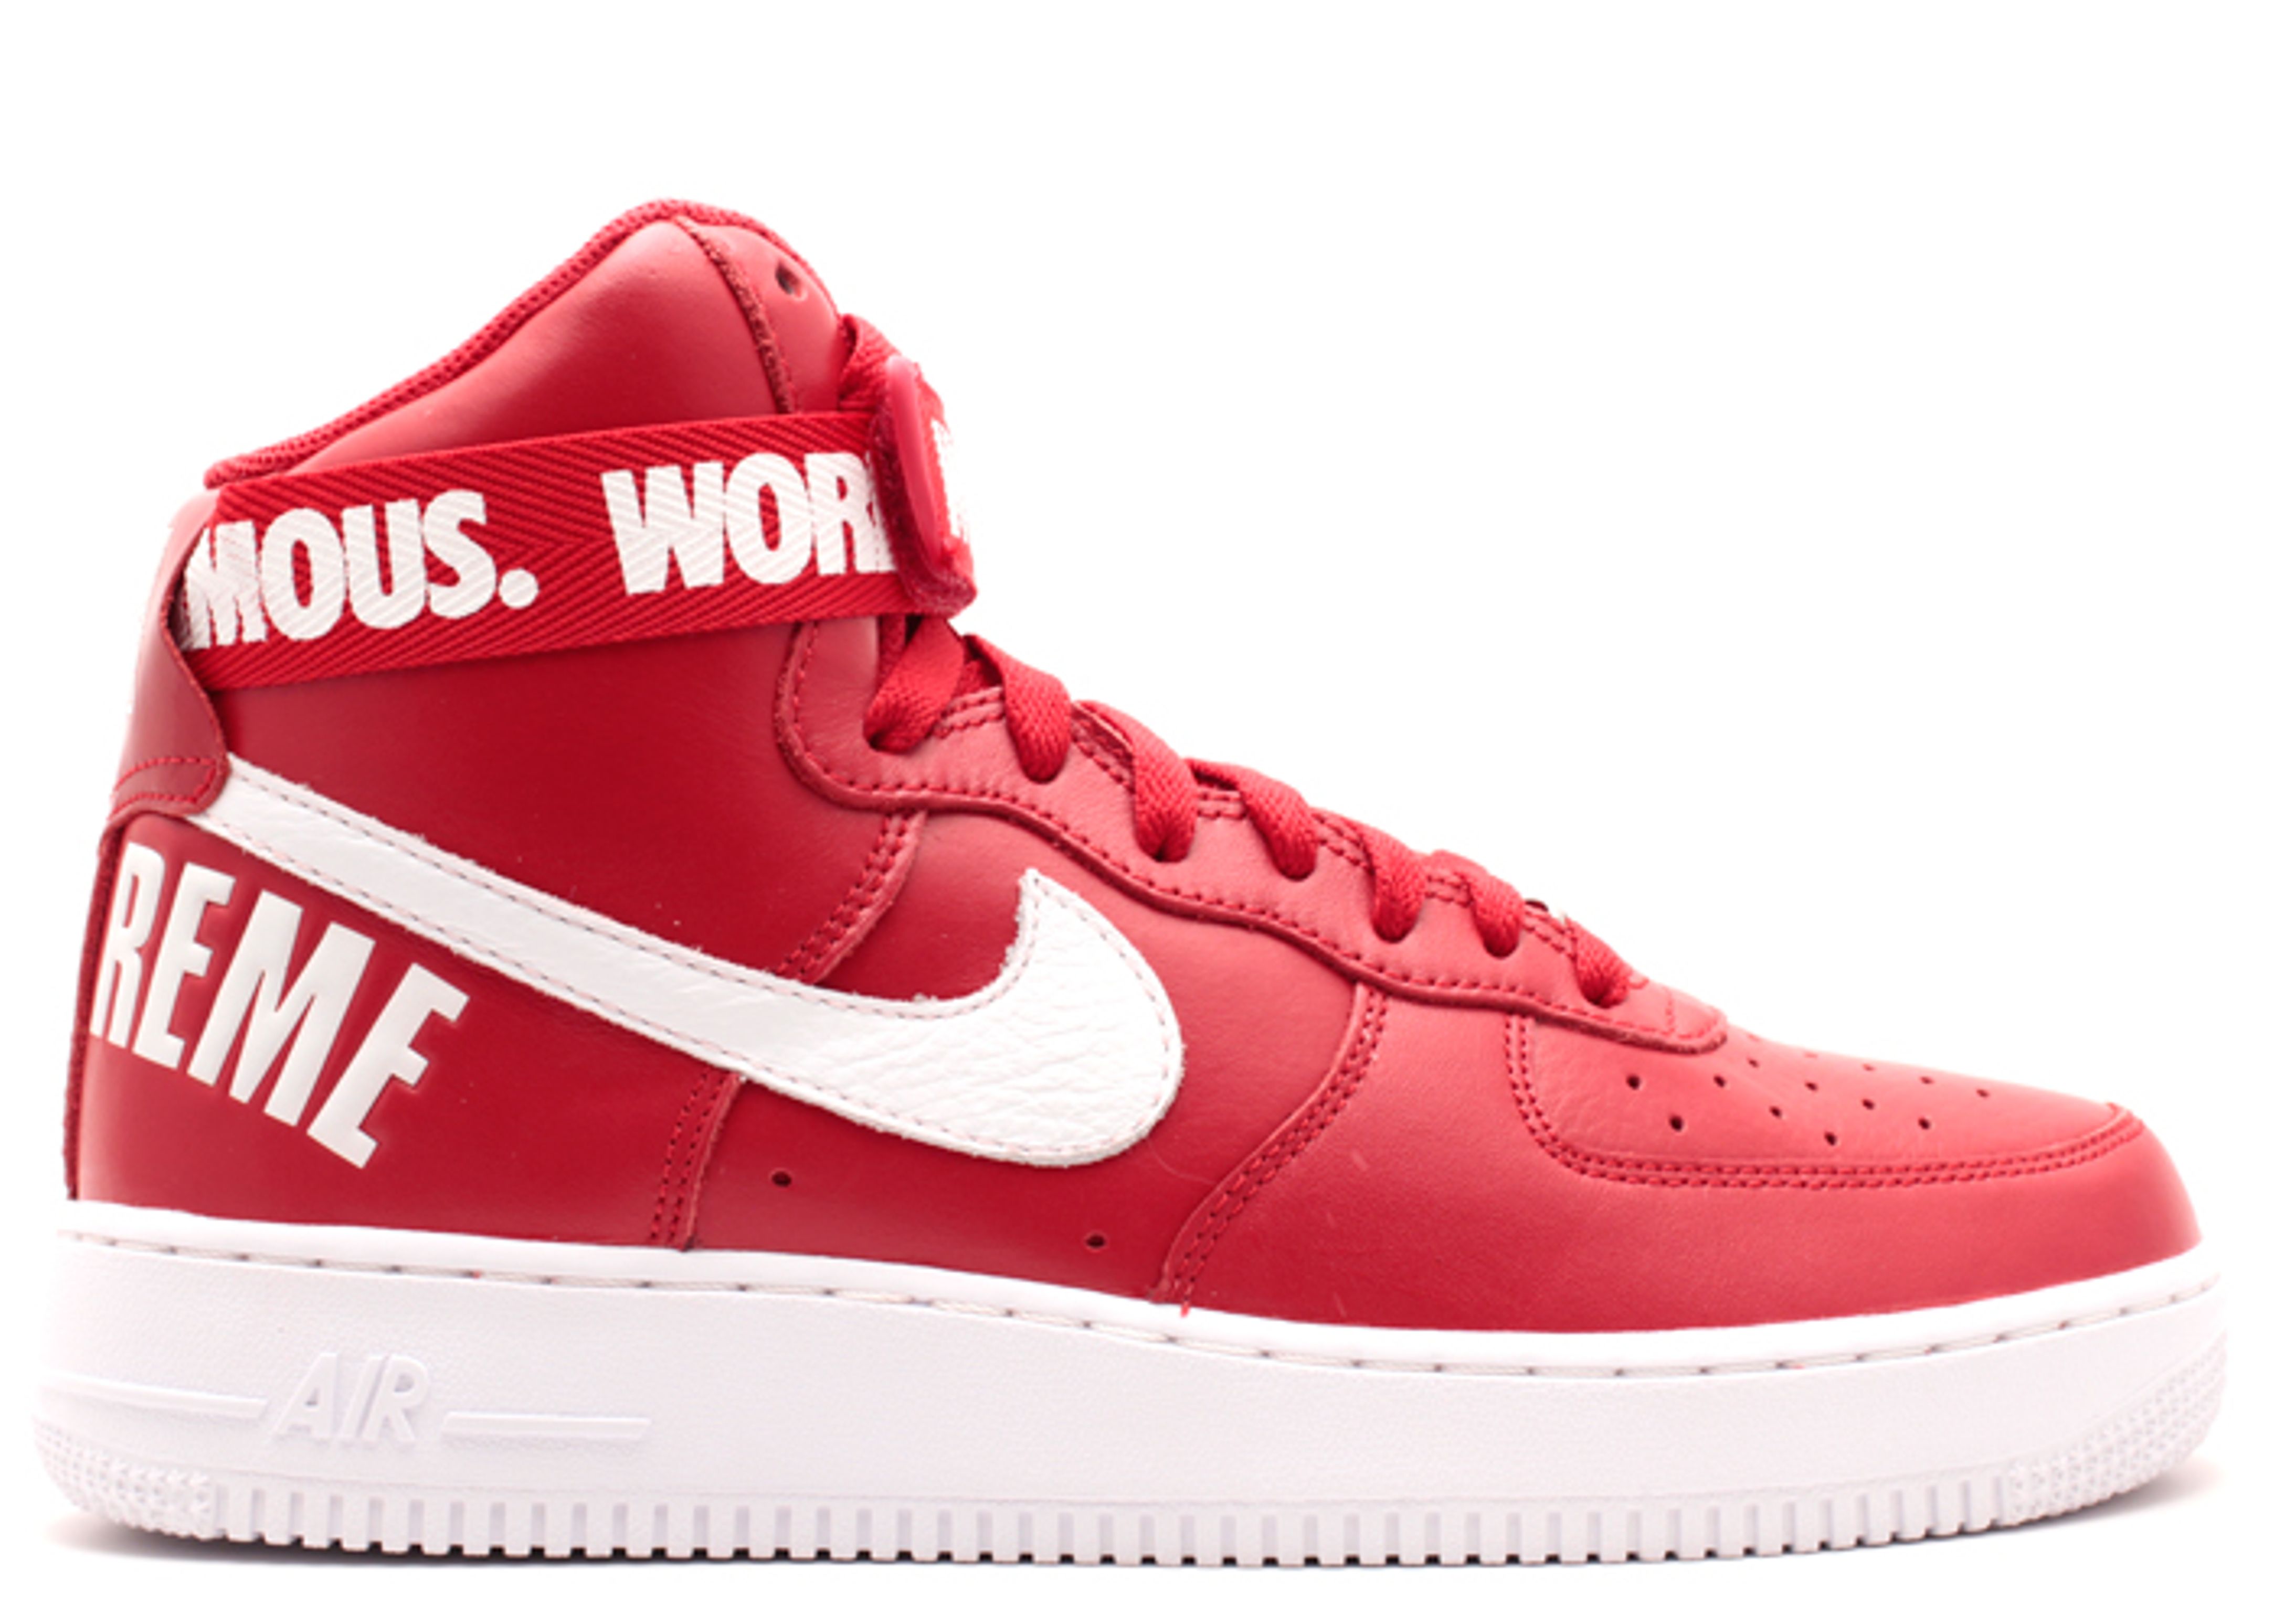 Supreme x Air Force 1 High SP 'Red'